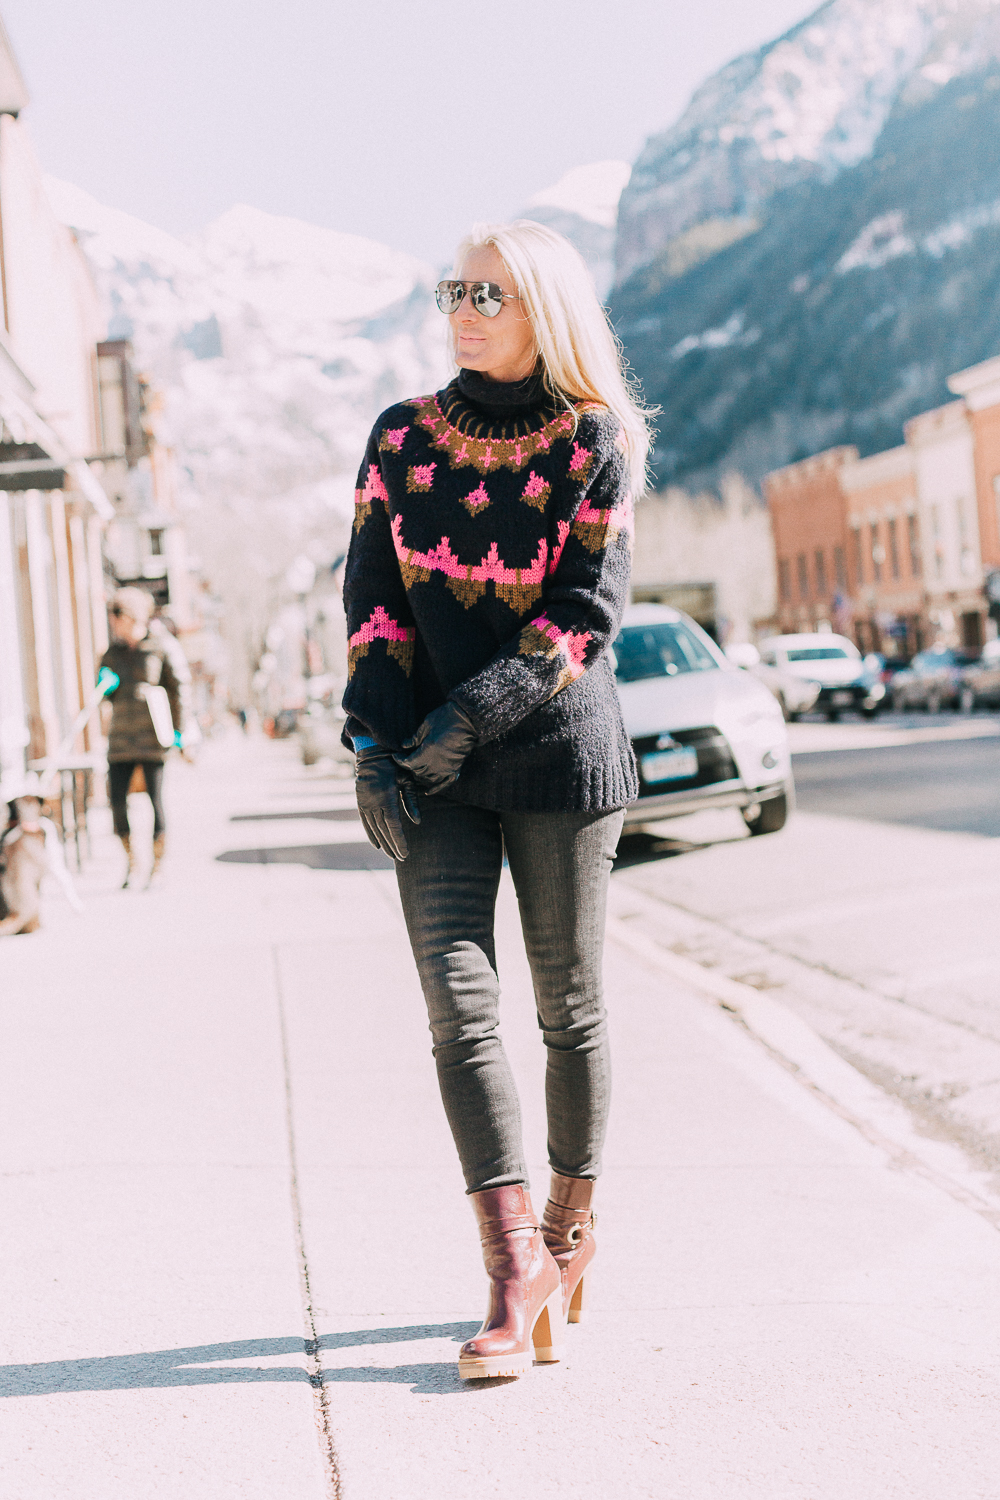 oversized chunky sweater by A.L.C. on fashion blogger in Telluride, Colorado